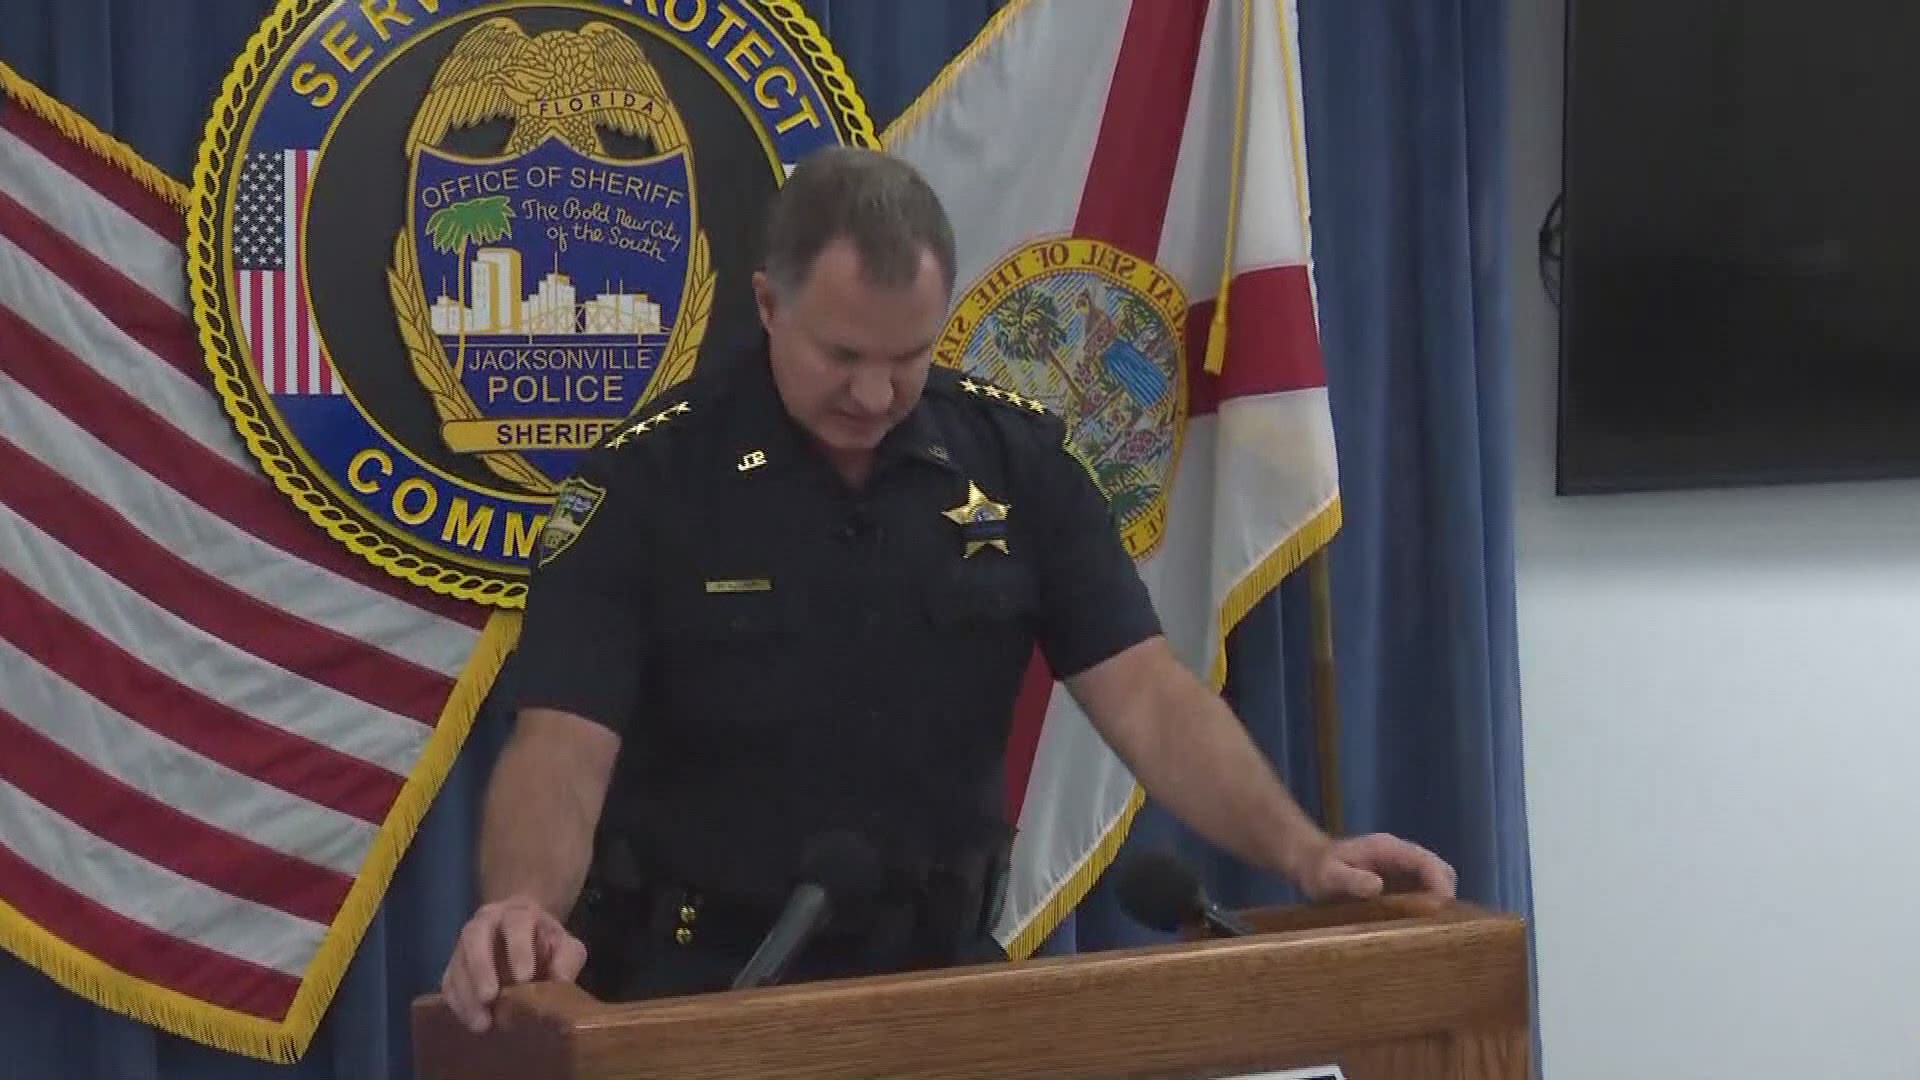 A 20-year veteran with the Jacksonville Sheriff's Office was arrested after JSO says he accepted payments for hours he did not work and manipulated their databases to avoid detection.